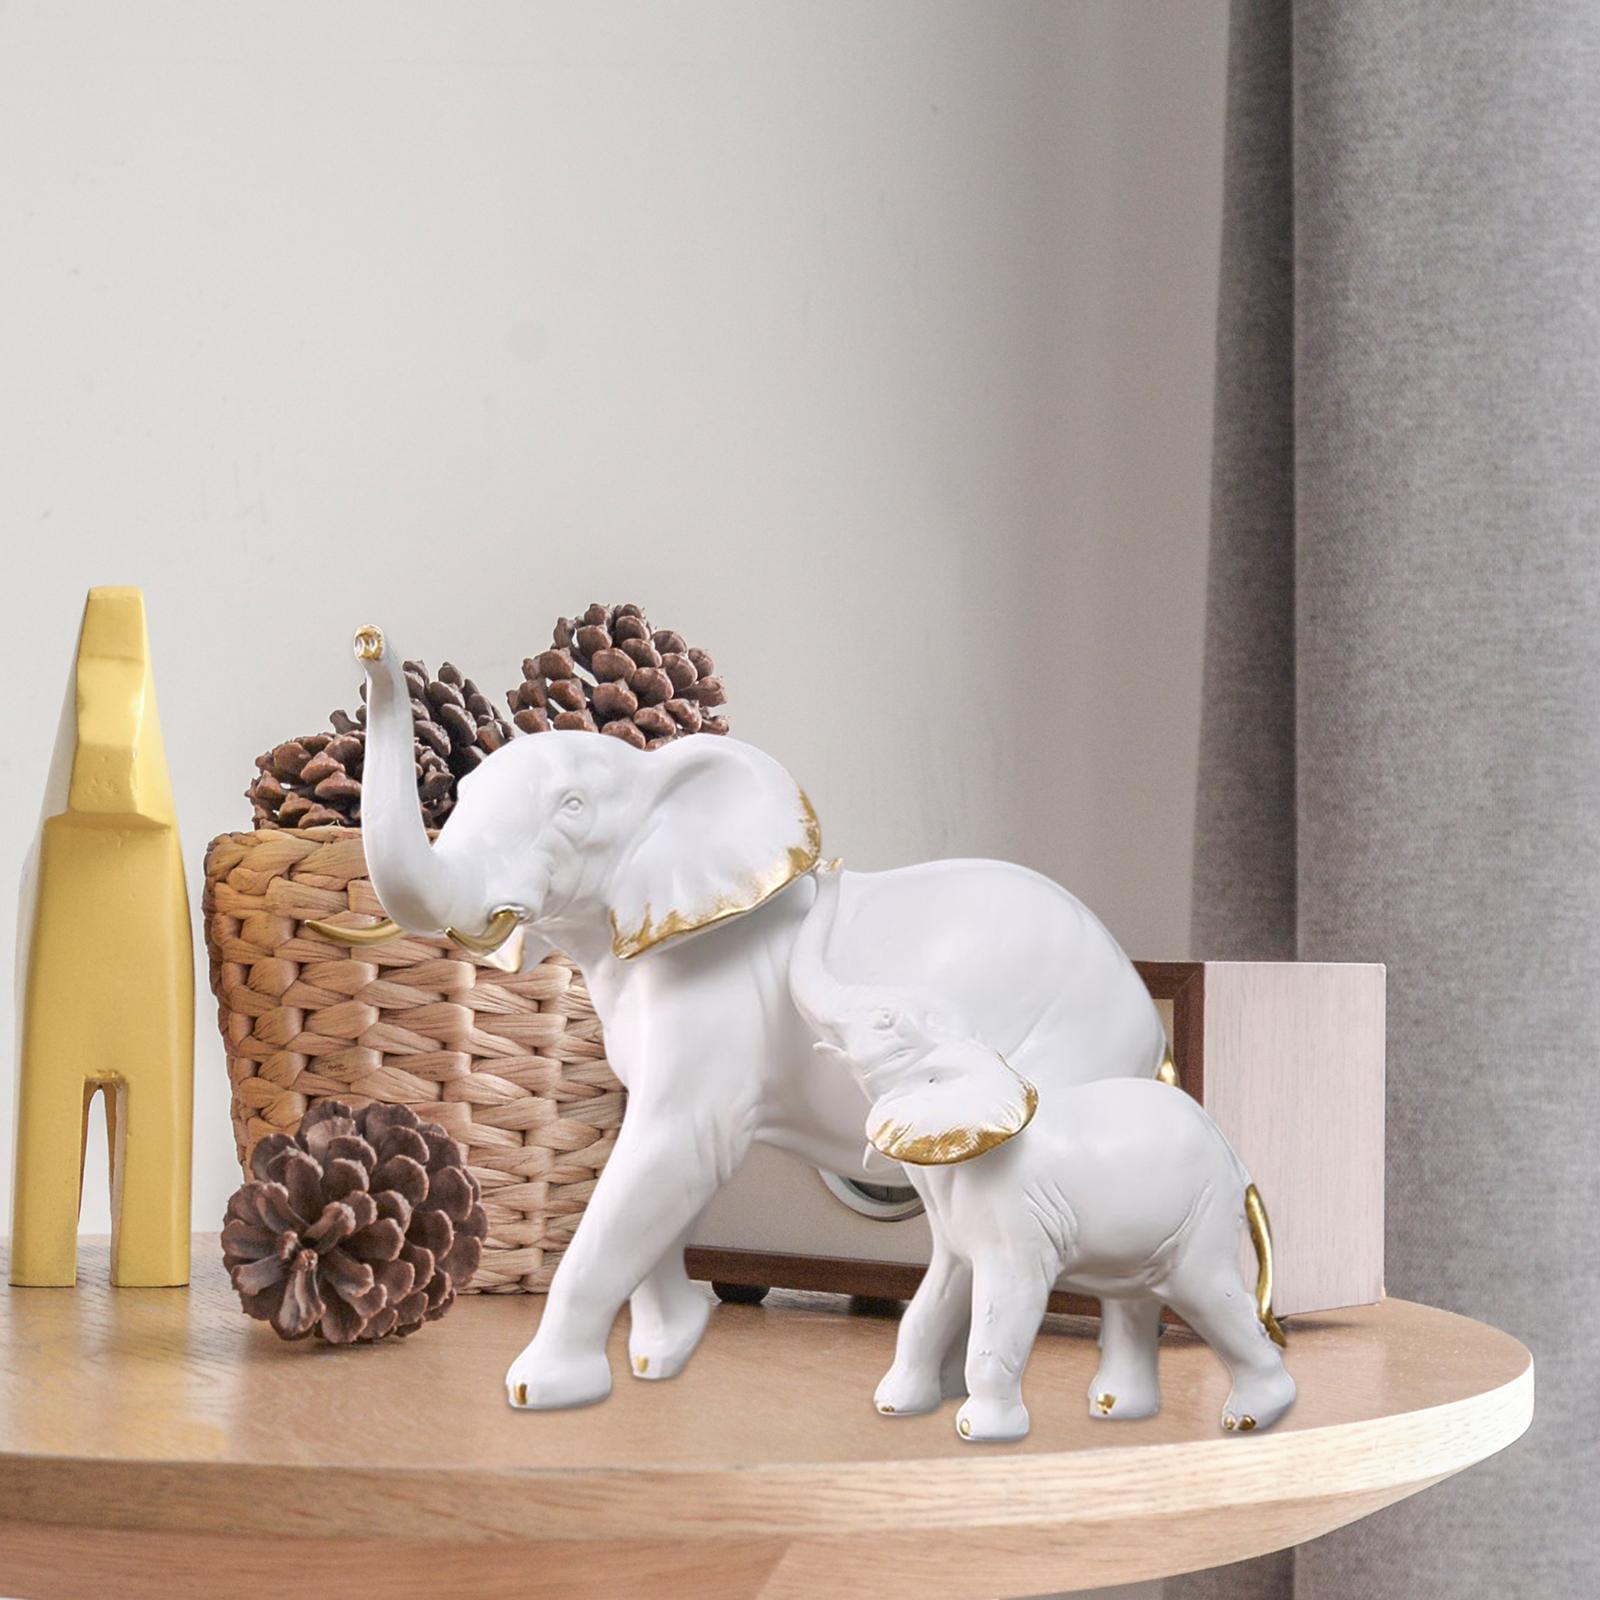 Resin Figurines Sculpture Elephant Statues for Wedding Bedroom New Year Home White With Kids